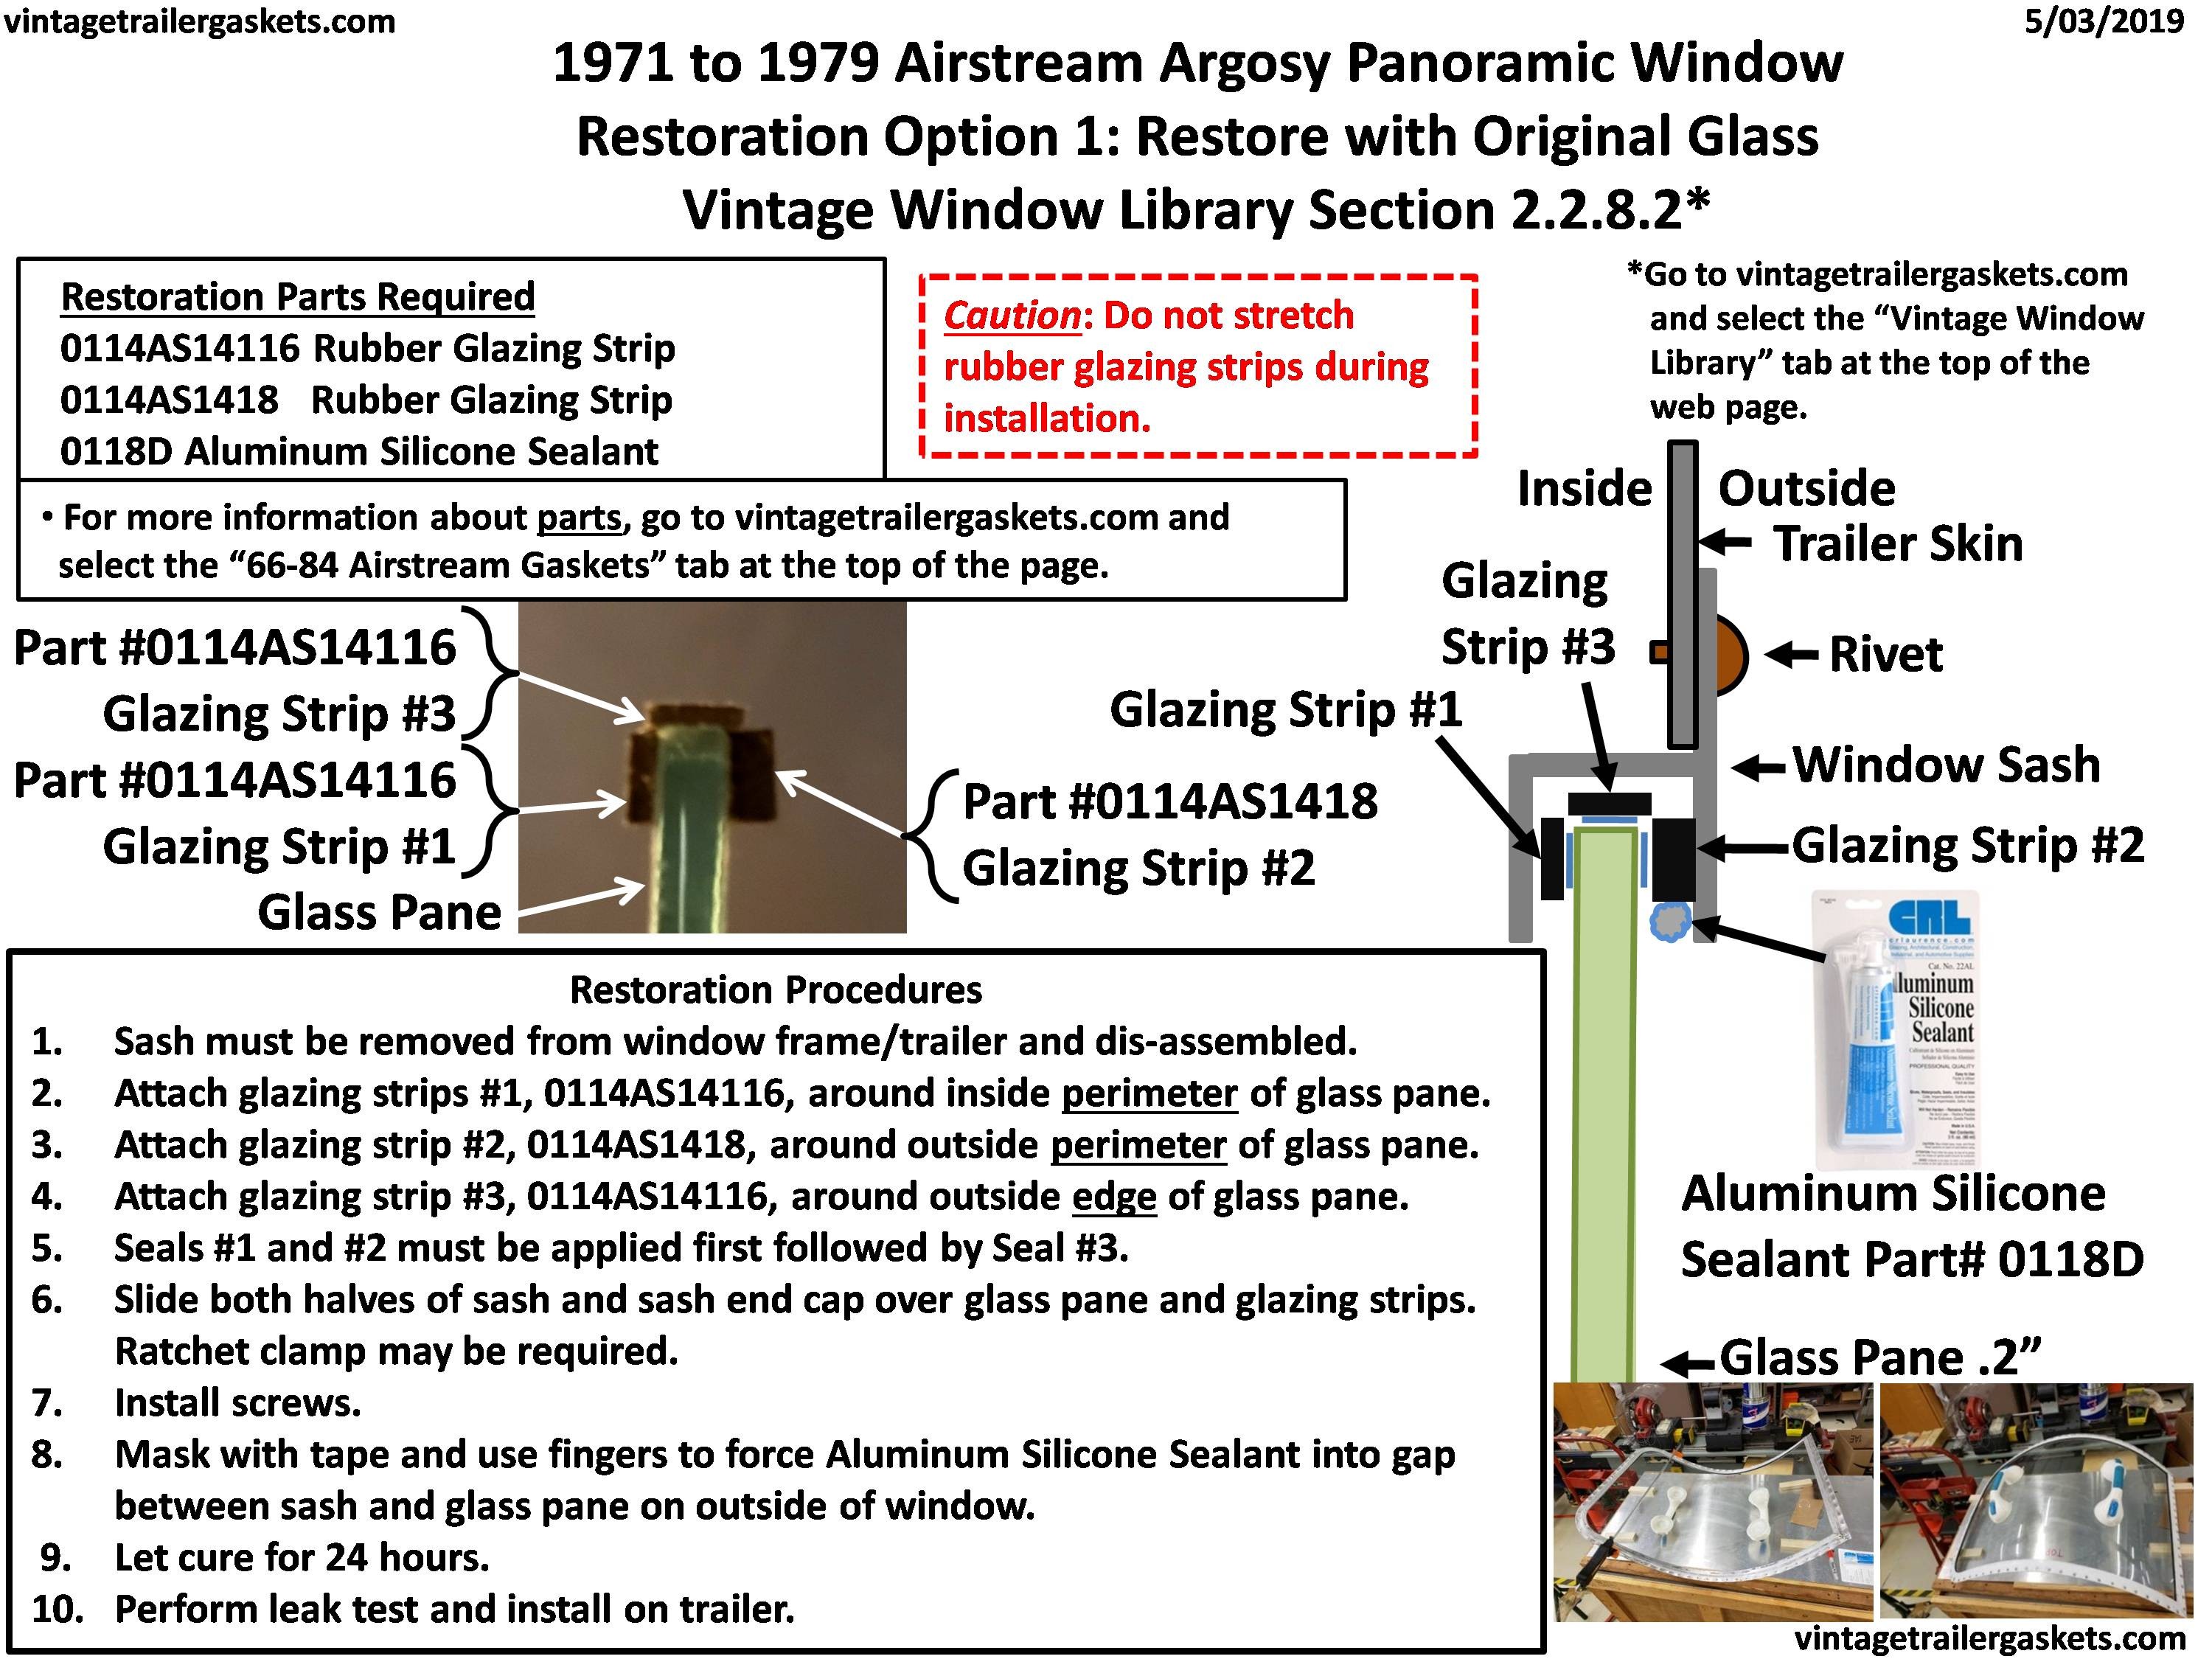 1972 to 1979 Airstream Argosy Panoramic Window with Curved Glass